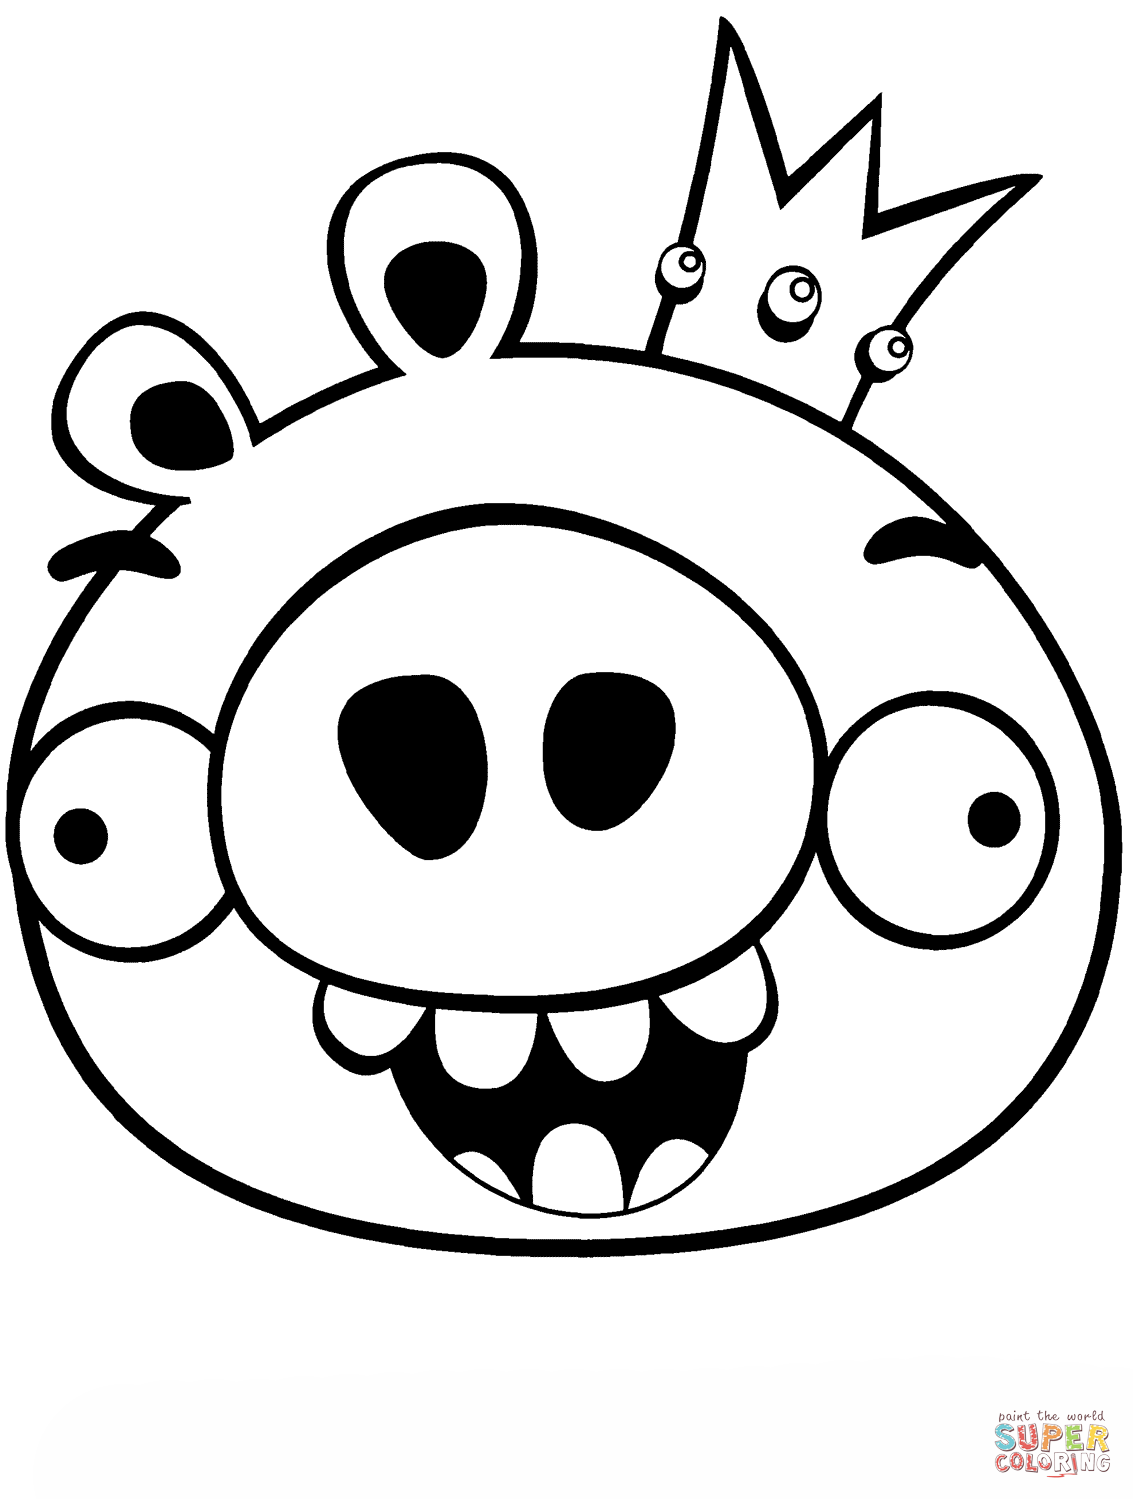 King smoothcheeks coloring page free printable coloring pages